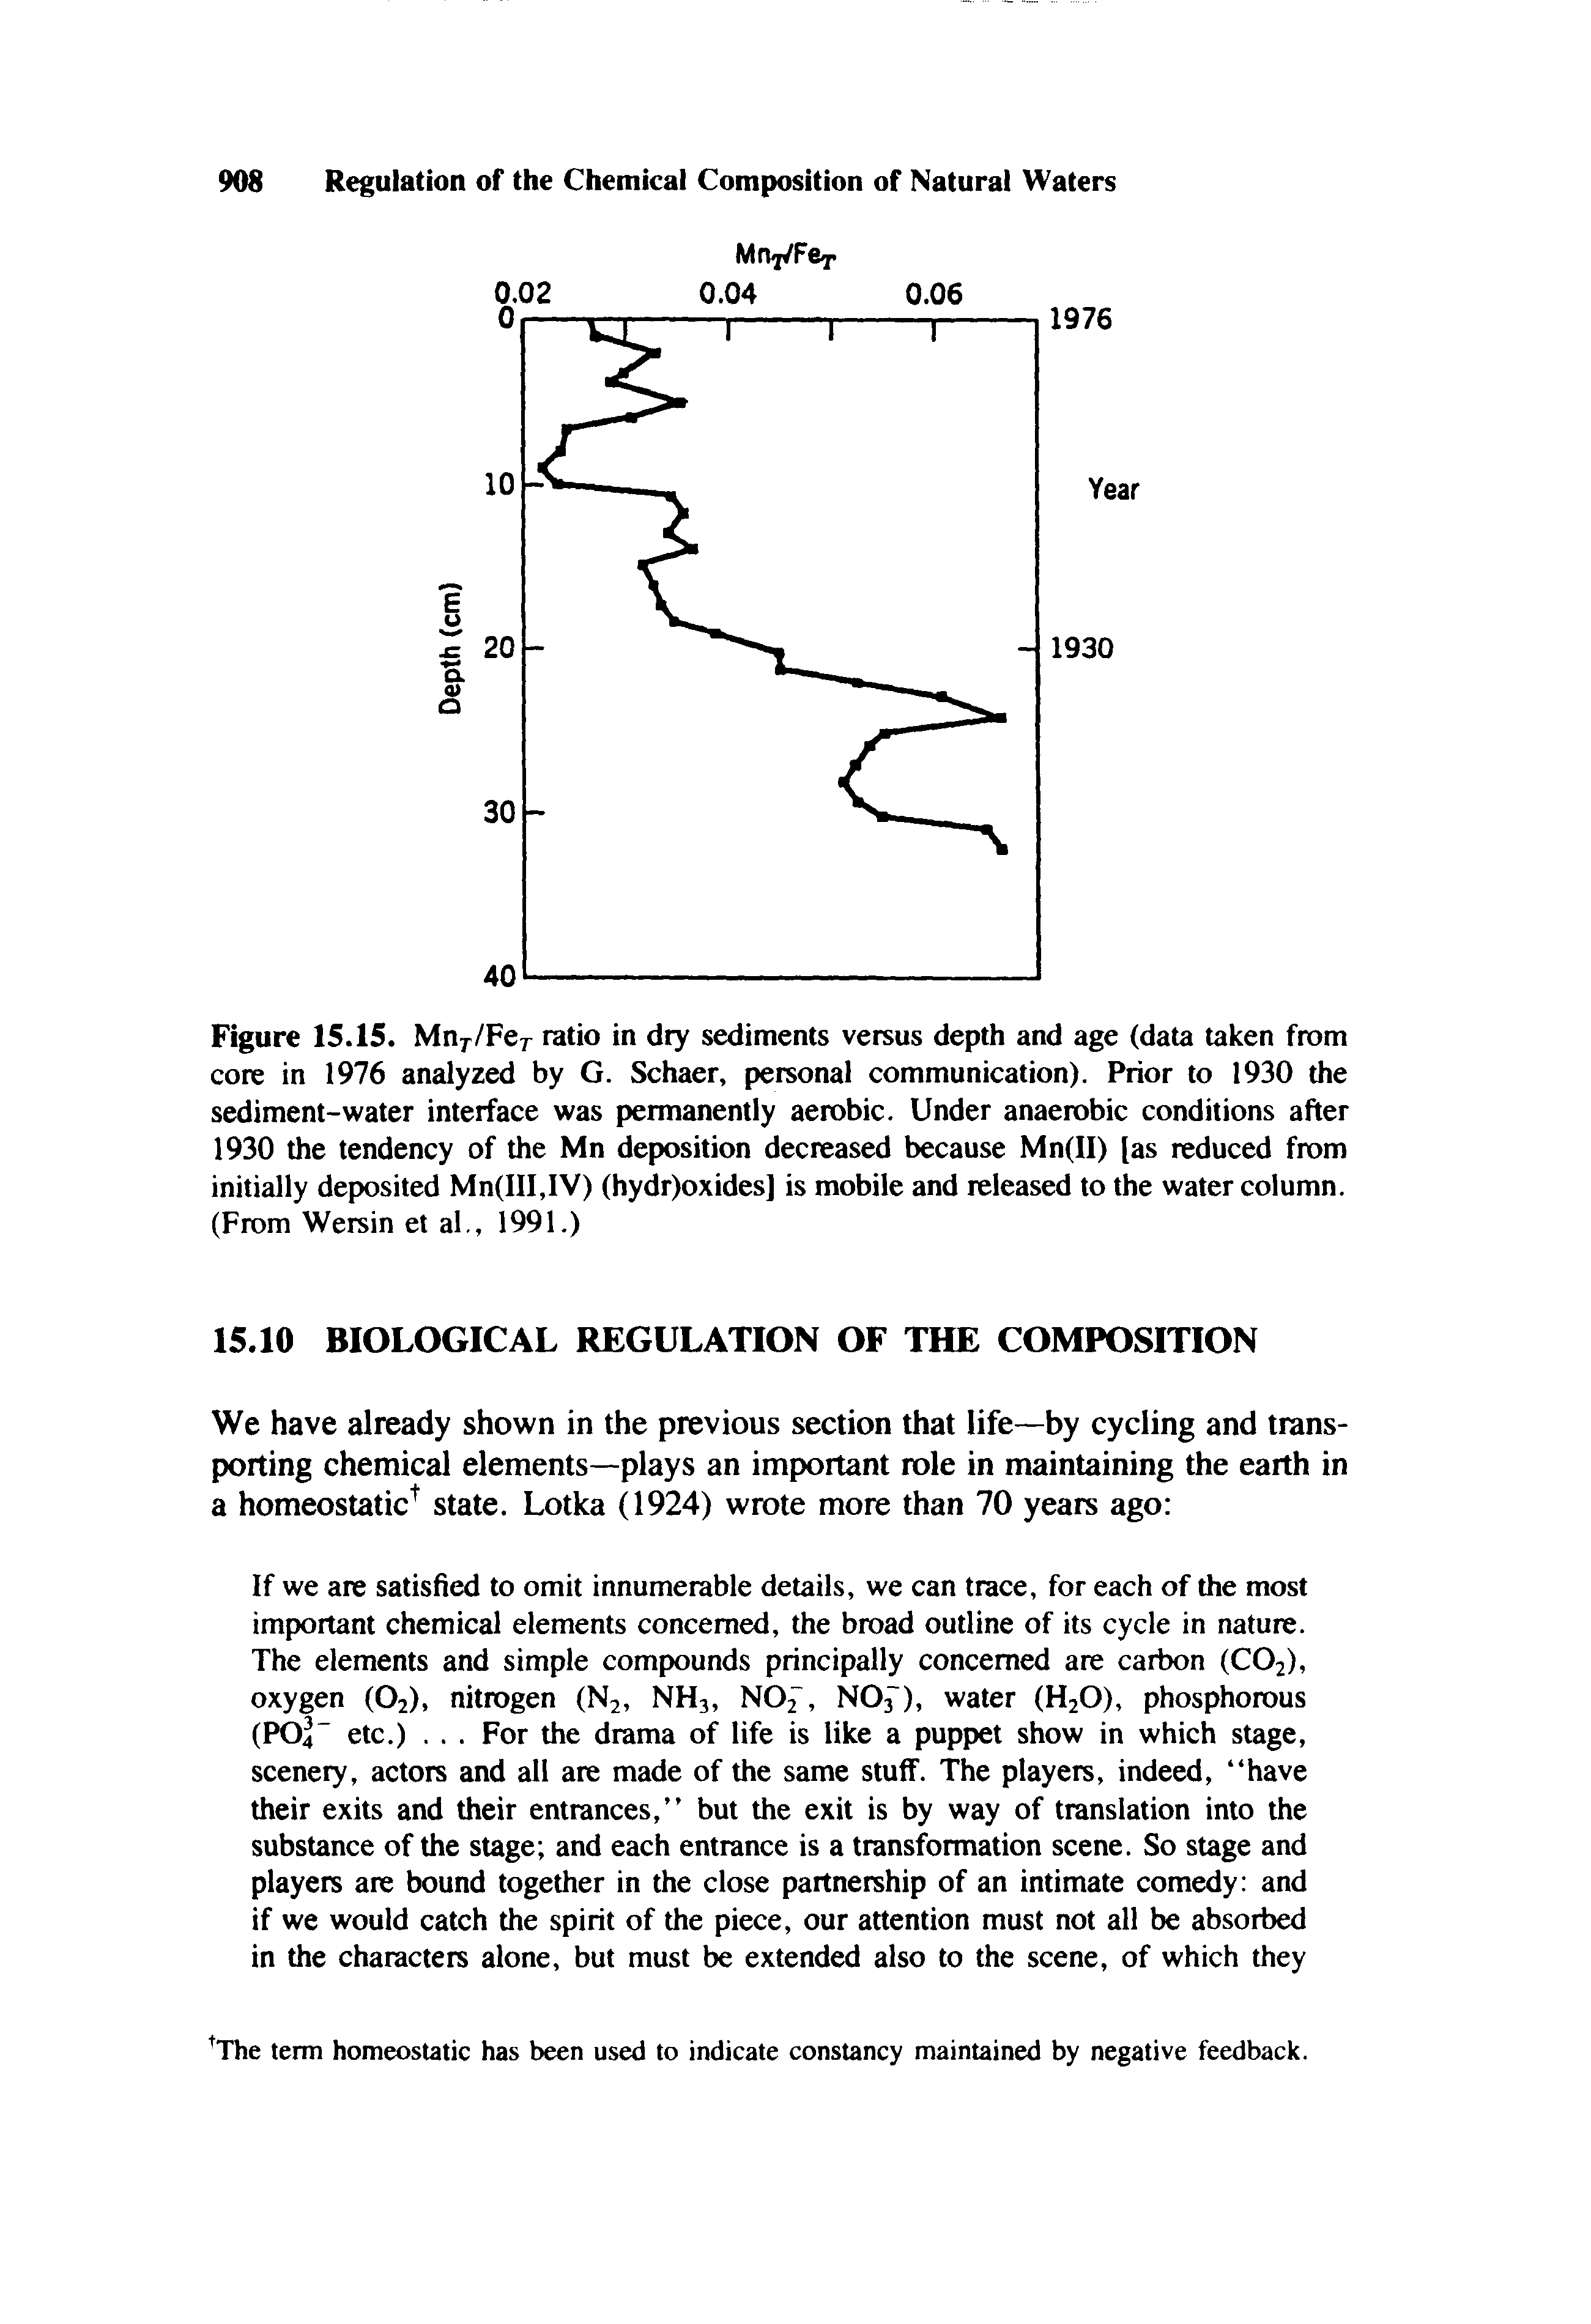 Figure 15.15. Mny /Fe ratio in dry sediments versus depth and age (data taken from core in 1976 analyzed by G. Schaer, personal communication). Prior to 1930 the sediment-water interface was permanently aerobic. Under anaerobic conditions after 1930 the tendency of the Mn deposition decreased because Mn(ll) [as reduced from initially deposited Mn(III,IV) (hydr)oxides] is mobile and released to the water column. (From Wersin et al., 1991.)...